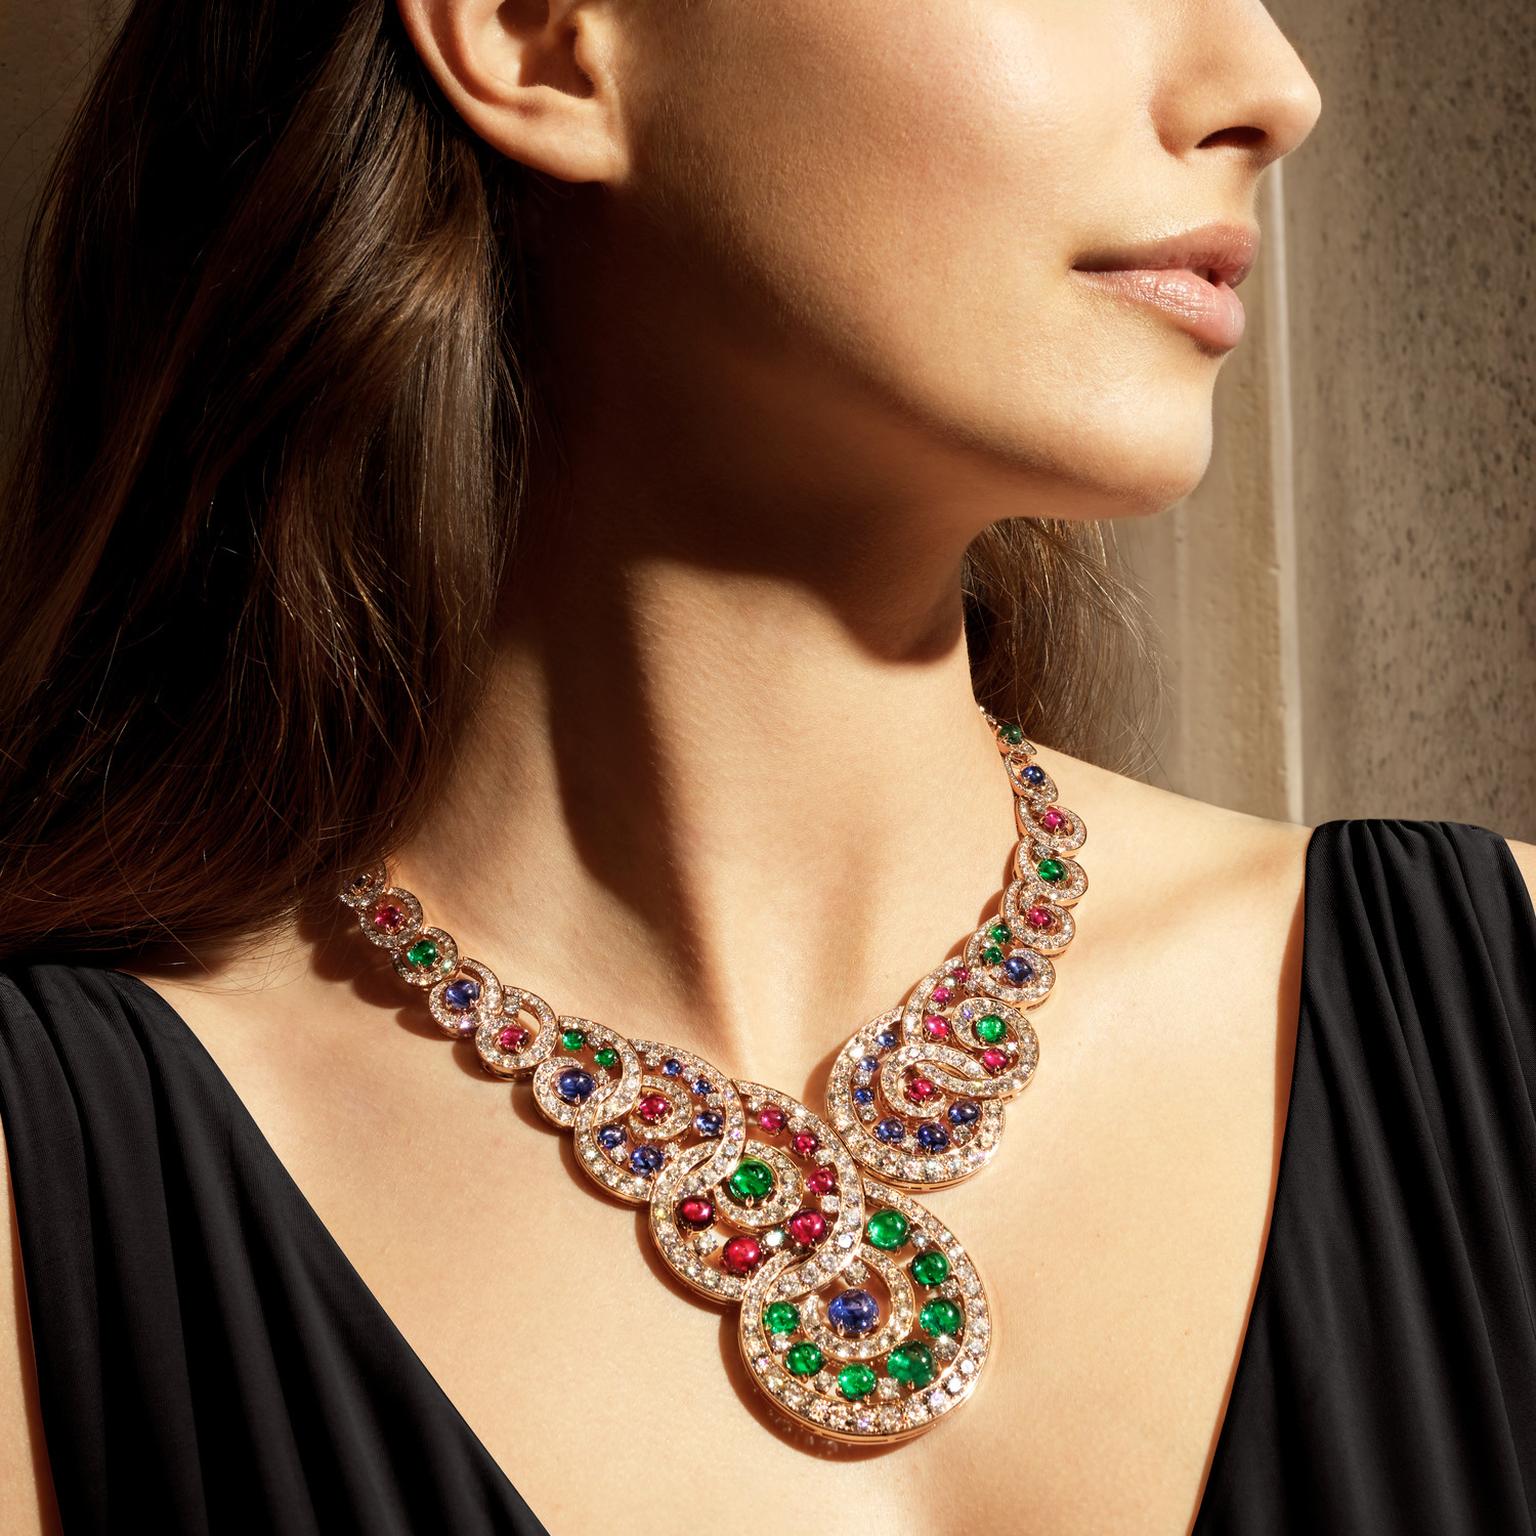 Baroque Spiral necklace by Bulgari on model